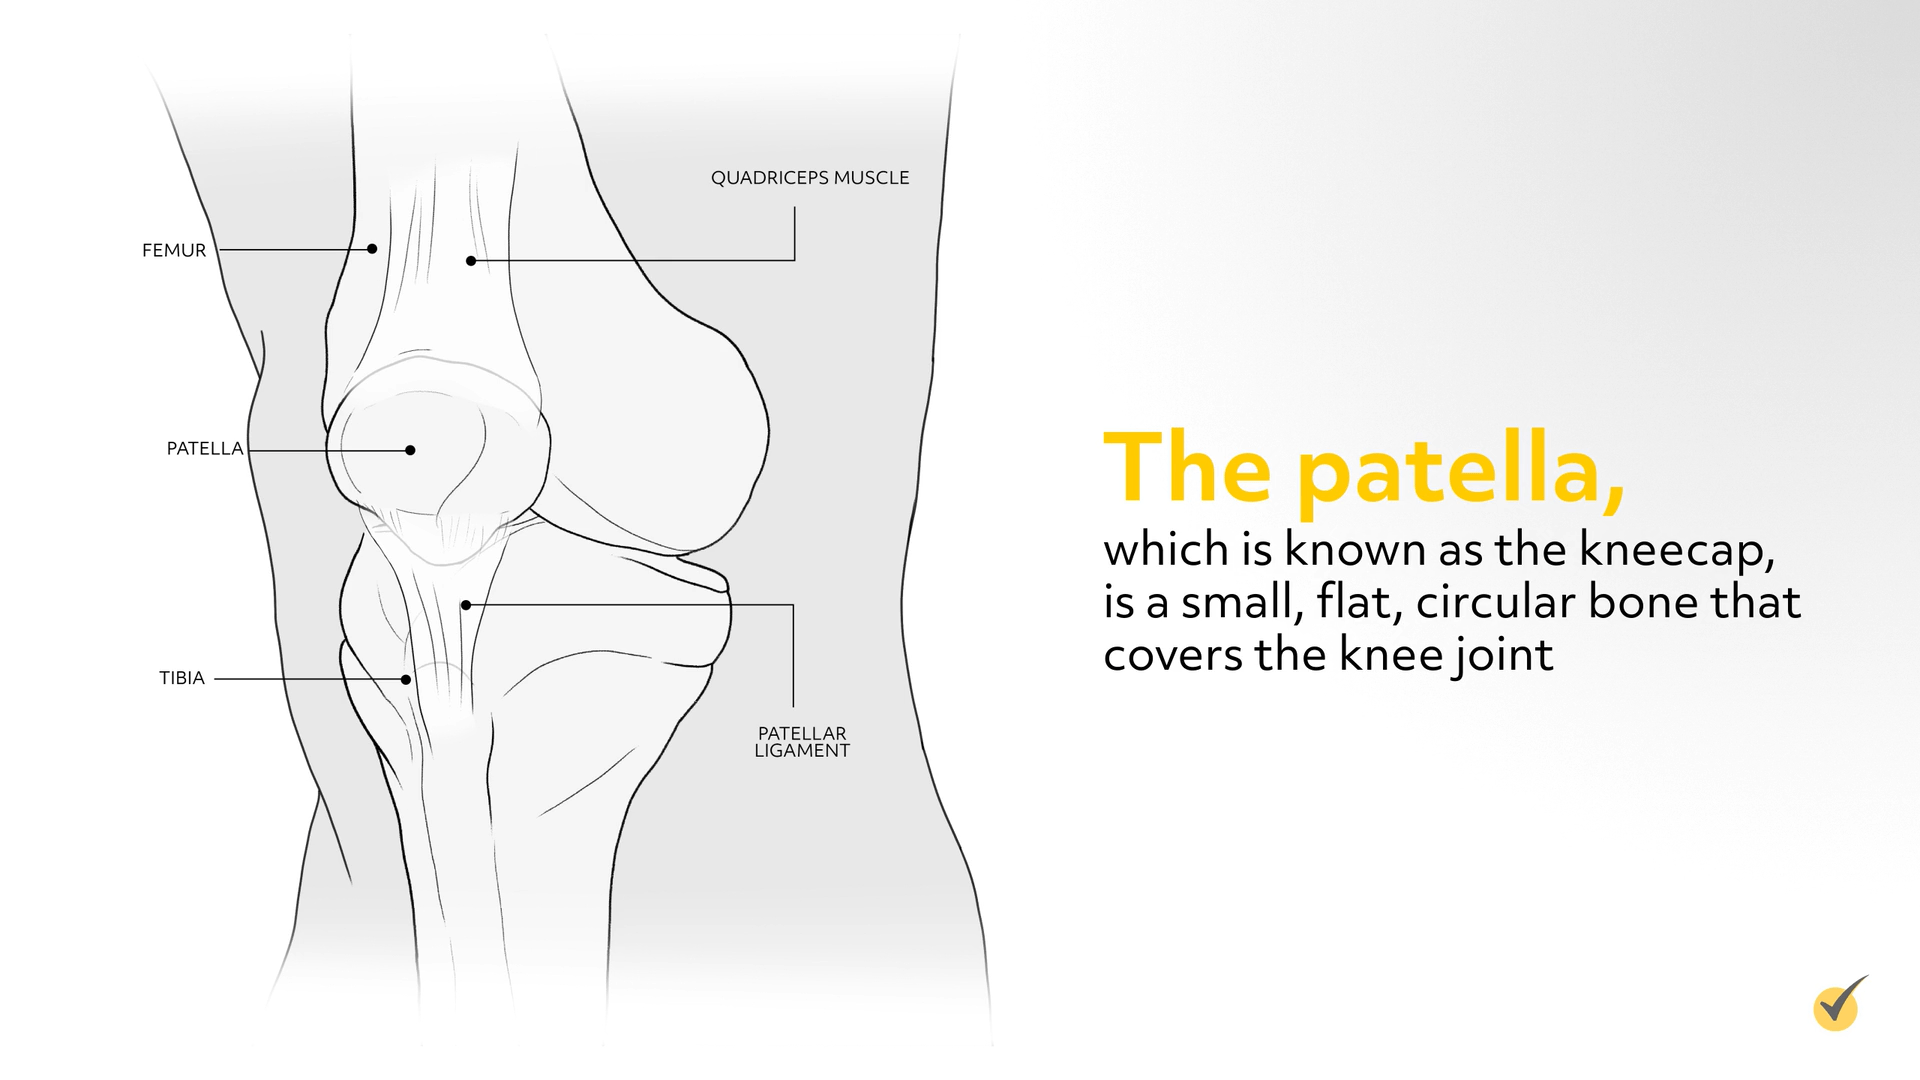 Image of the patella, also known as the kneecap. It is a small, flat, circular bone that covers the knee joint.